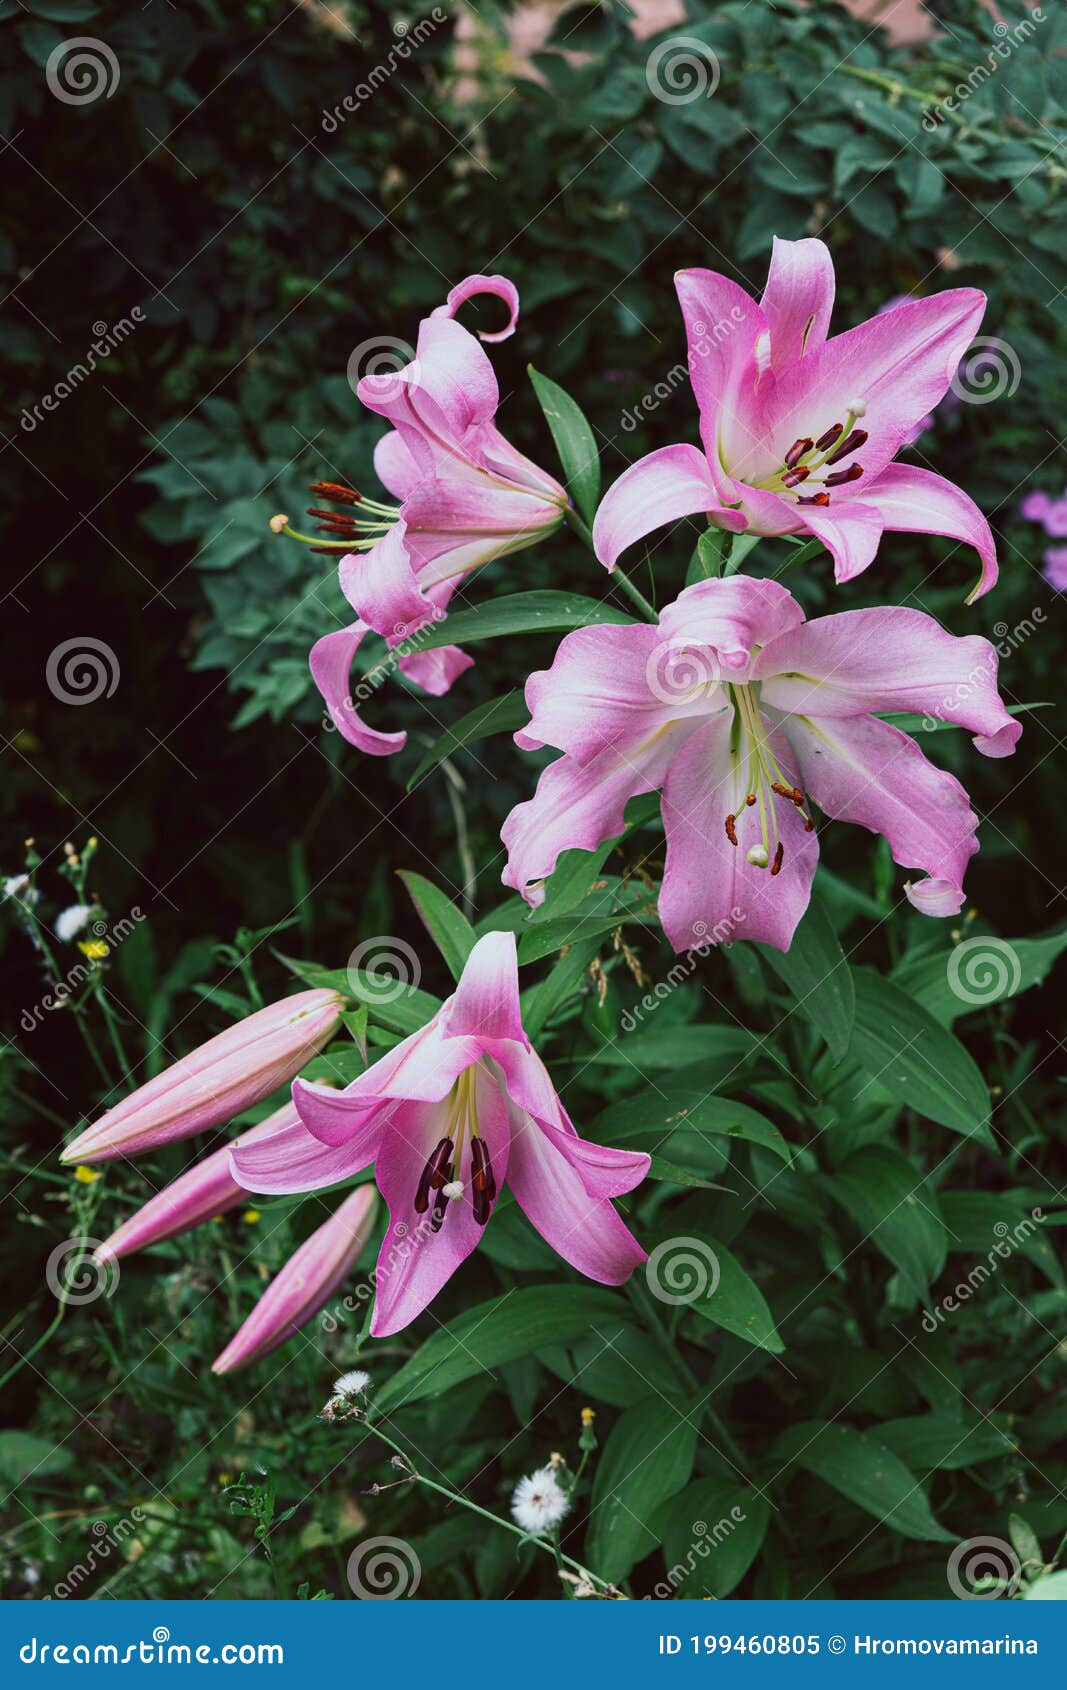 Pink Giant Lilies on a Background of Green Leaves Stock Image - Image ...